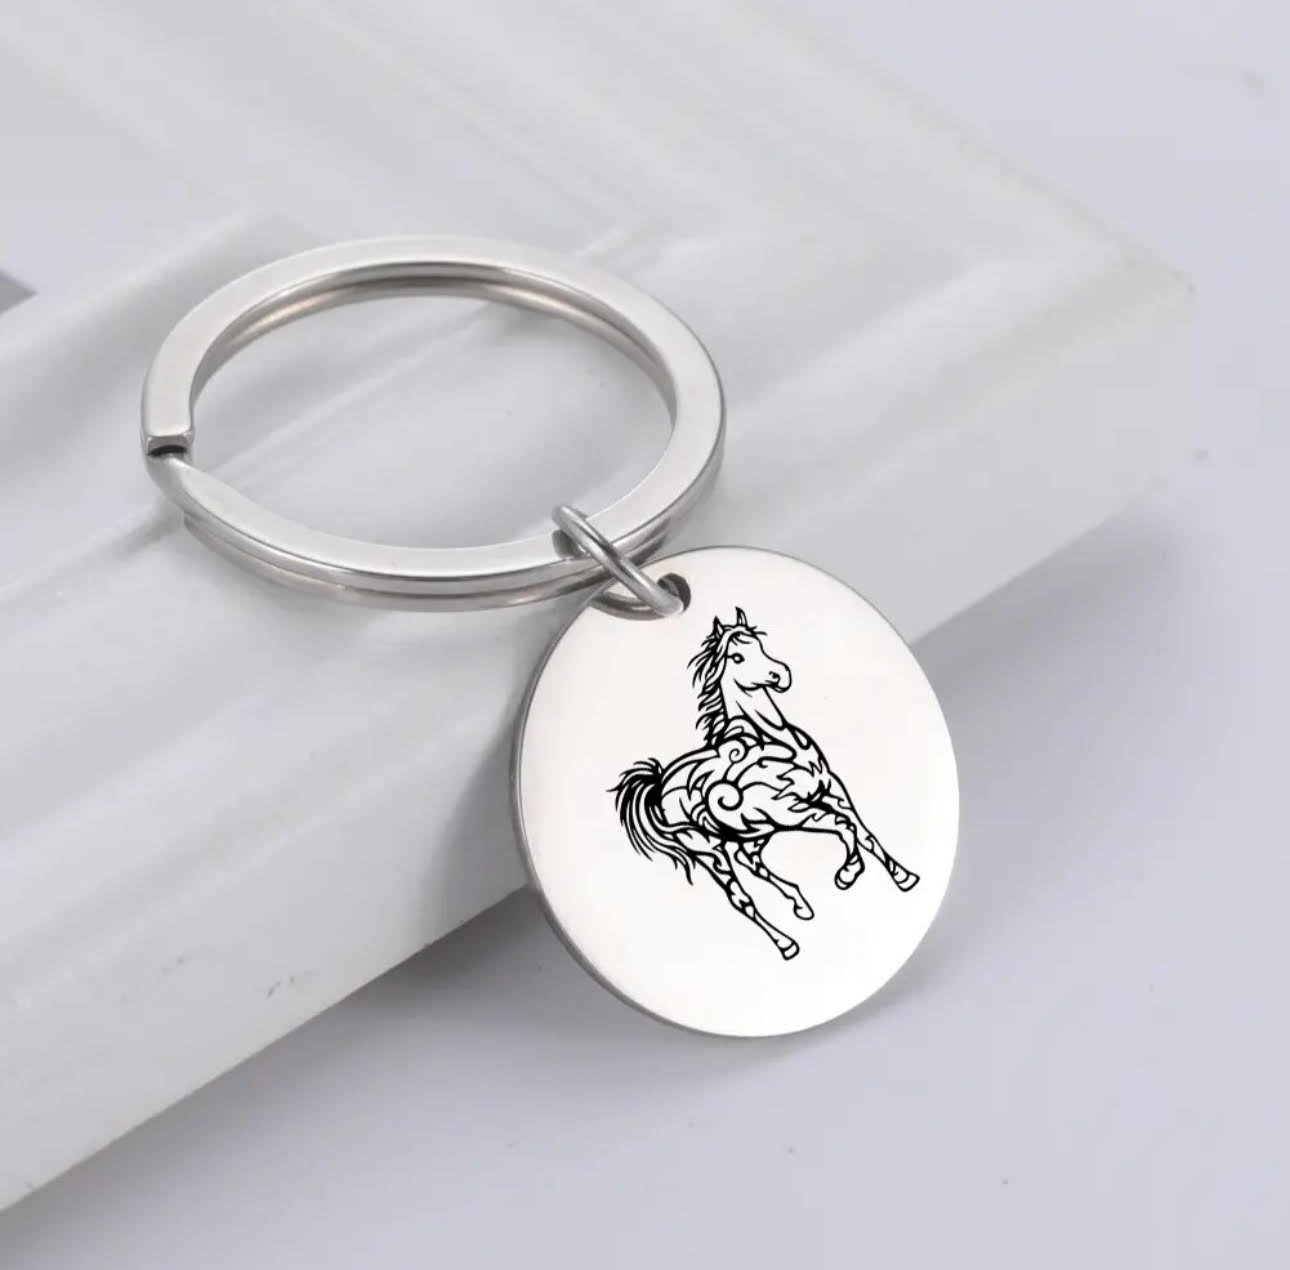 Stainless Steel Horse Keychain